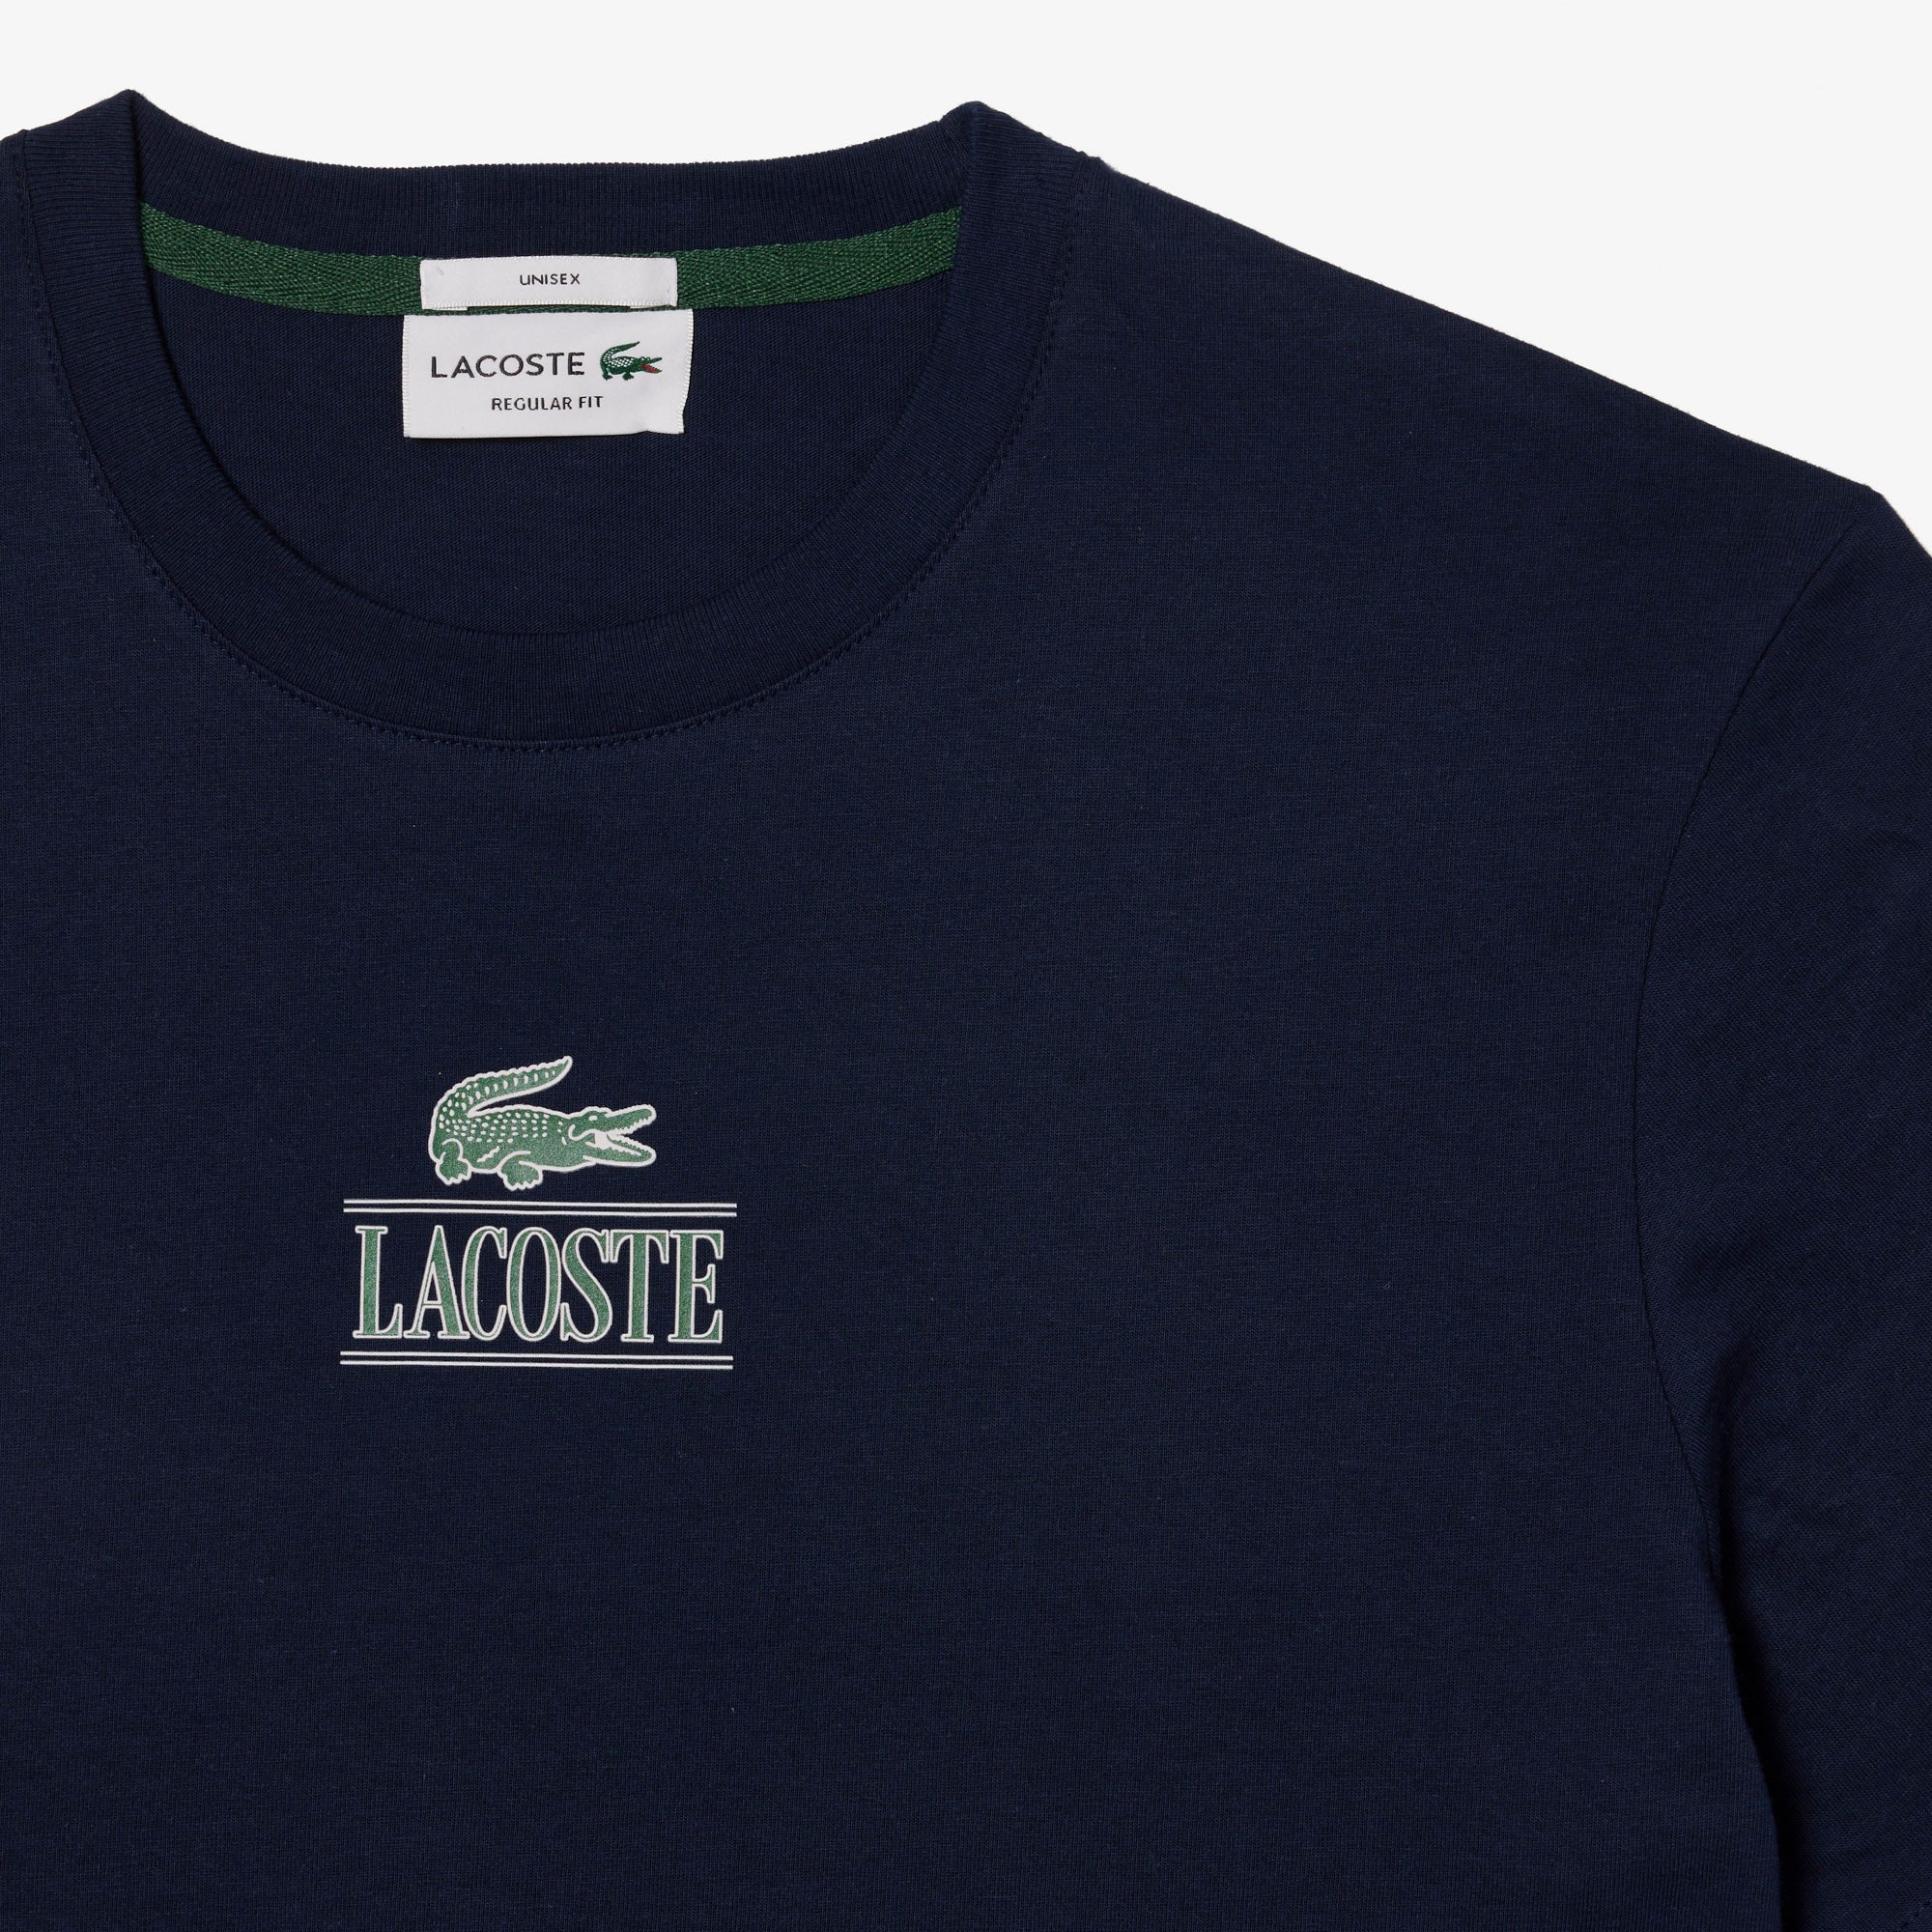 Lacoste Unisex Regular Fit Cotton Jersey Branded T-Shirt Navy Blue TH1147 166